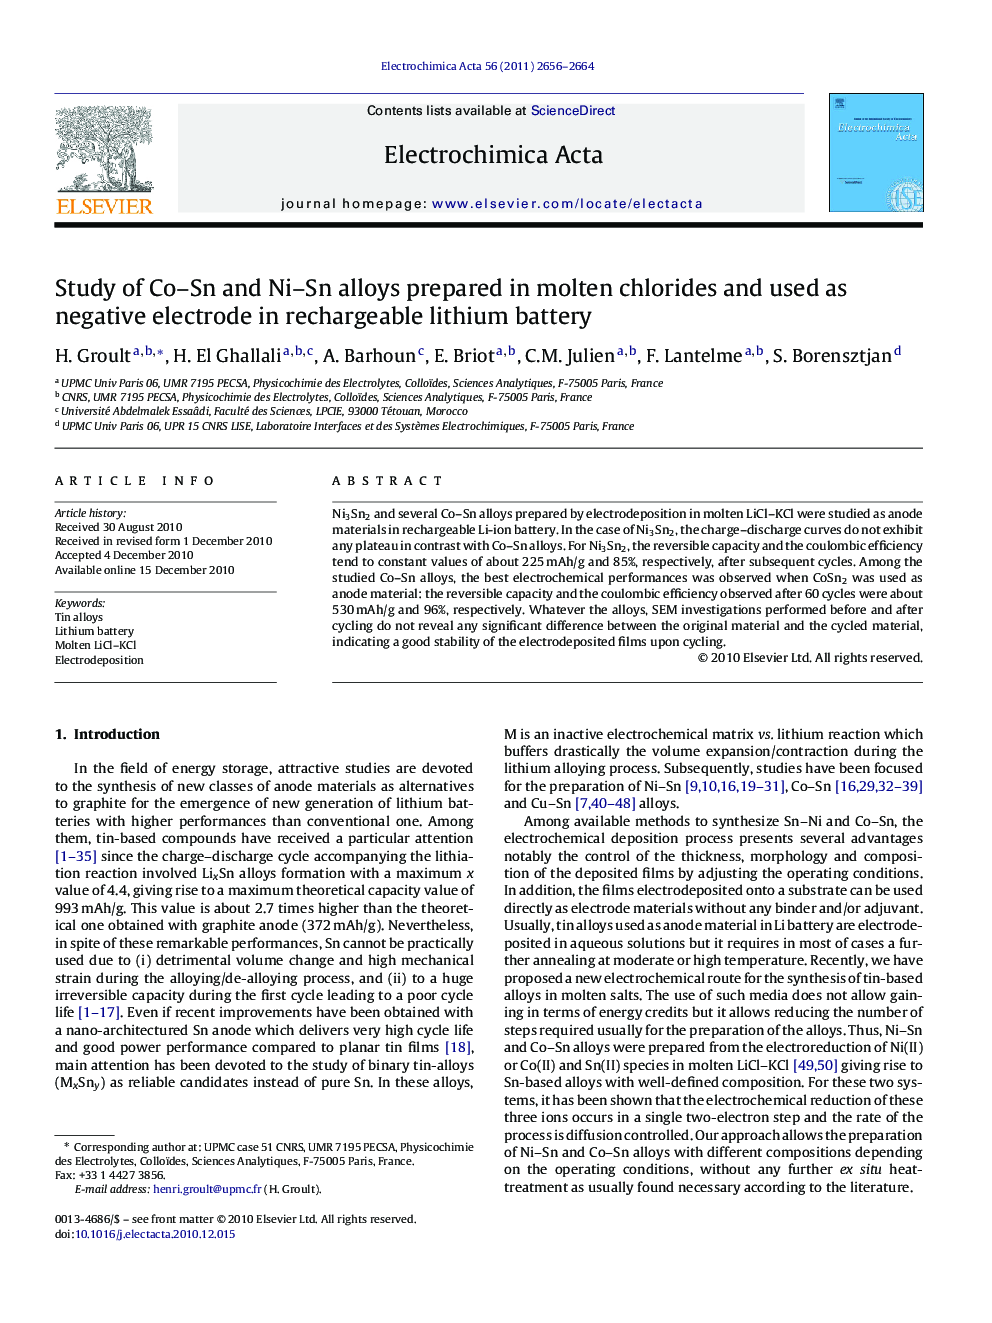 Study of Co–Sn and Ni–Sn alloys prepared in molten chlorides and used as negative electrode in rechargeable lithium battery